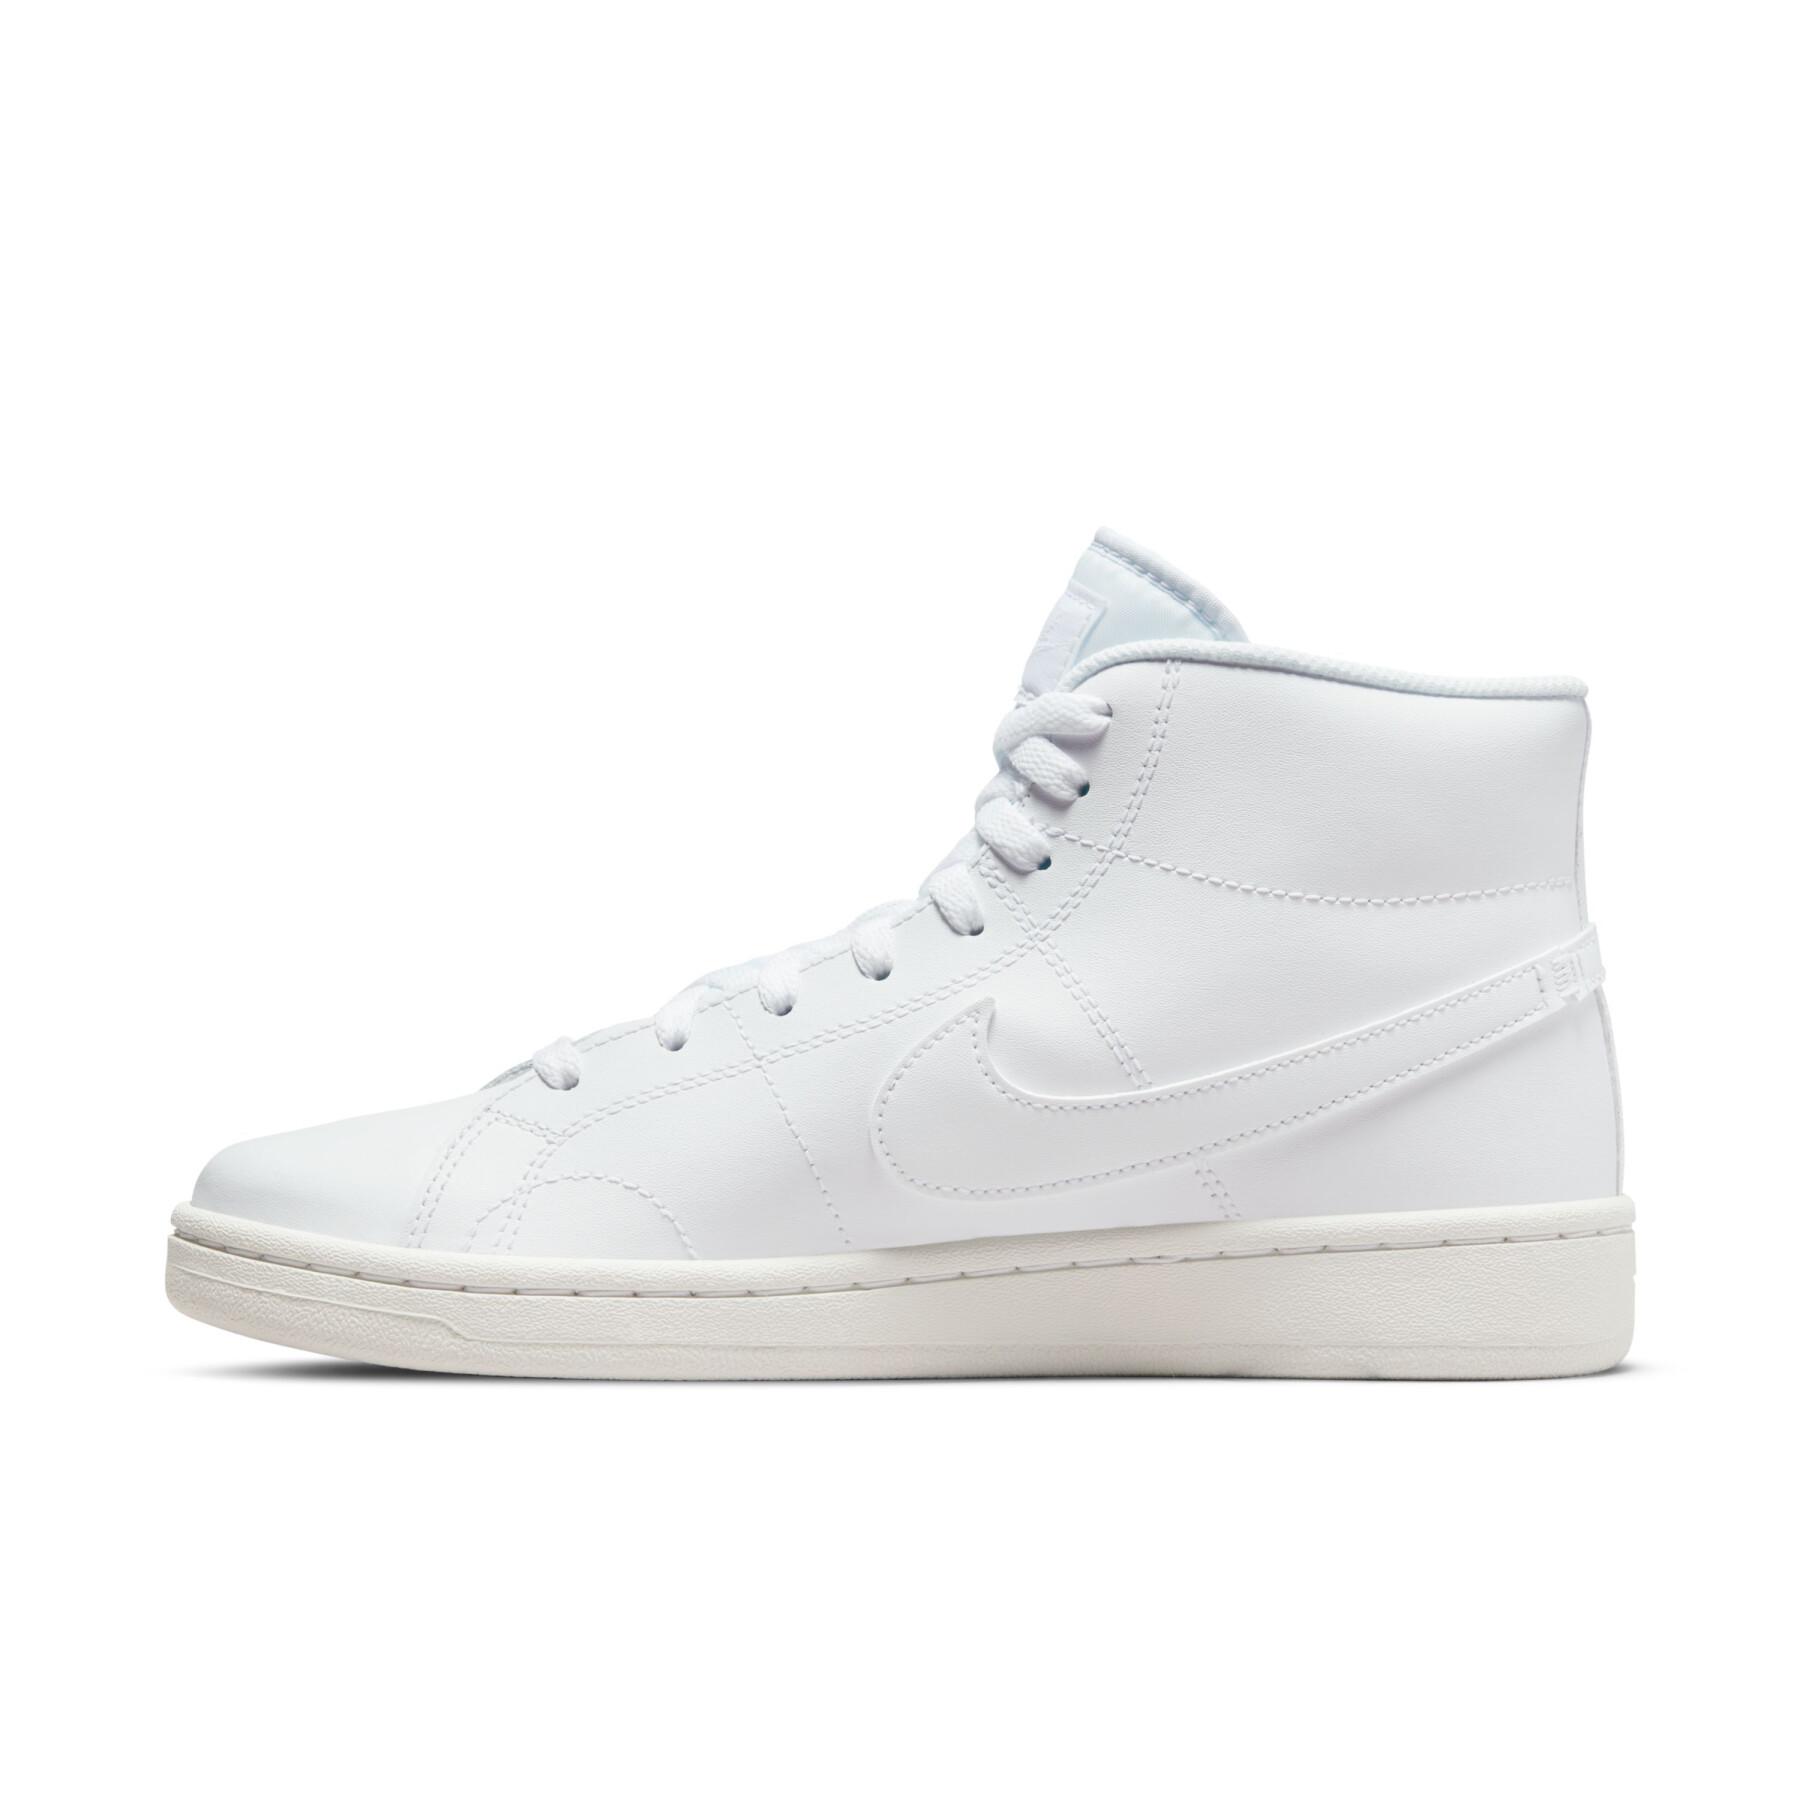 Damestrainers Nike Court Royale 2 mid